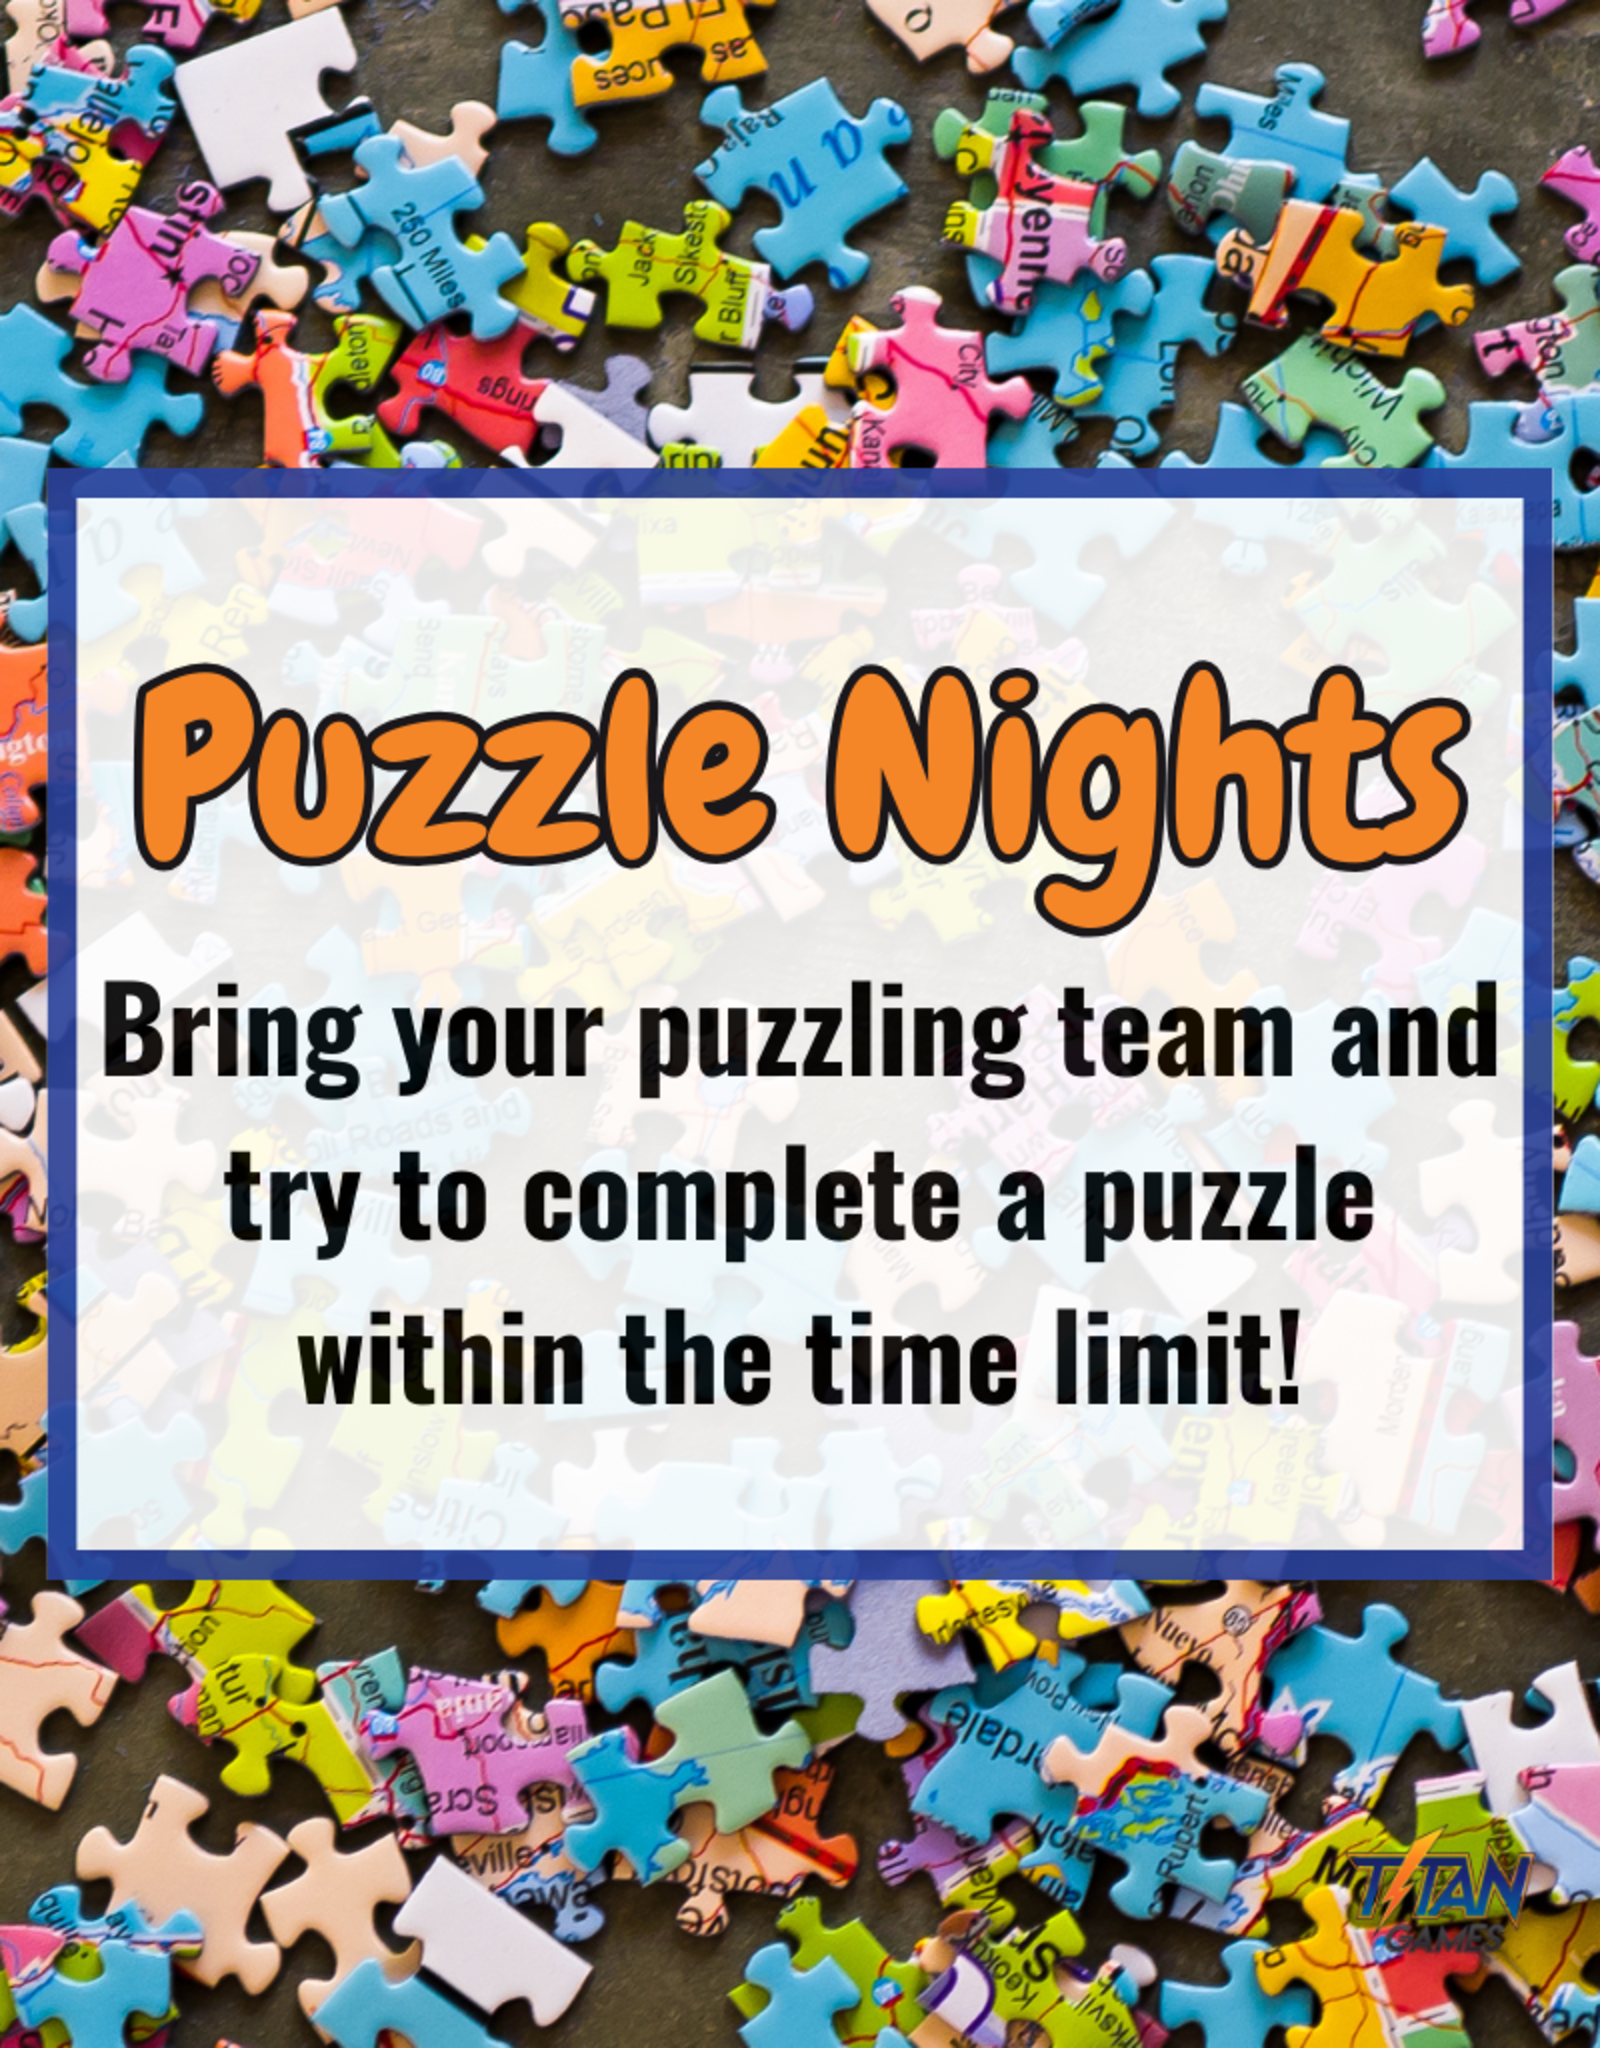 Puzzle Night Team Entry (5.13.24)